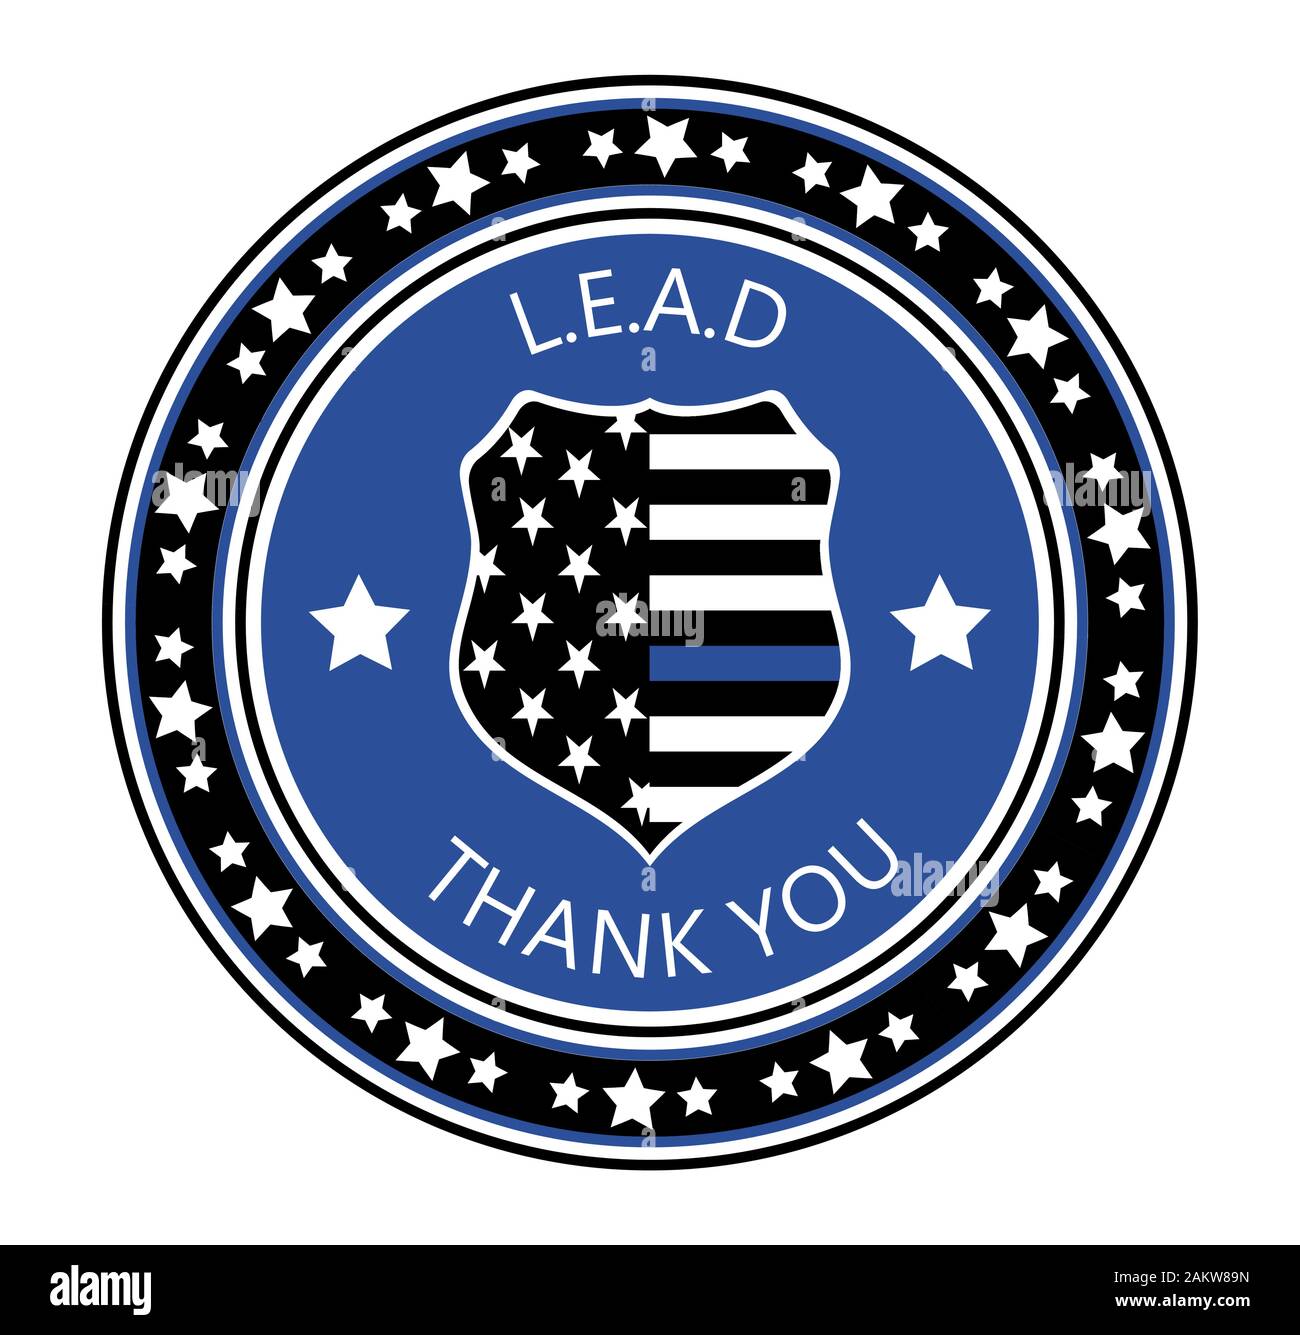 Law Enforcement Appreciation Day is celebreted in USA on January 9th each year. Police shild with US flag and L.E.A.D. slogan. Flat vector with stars Stock Vector